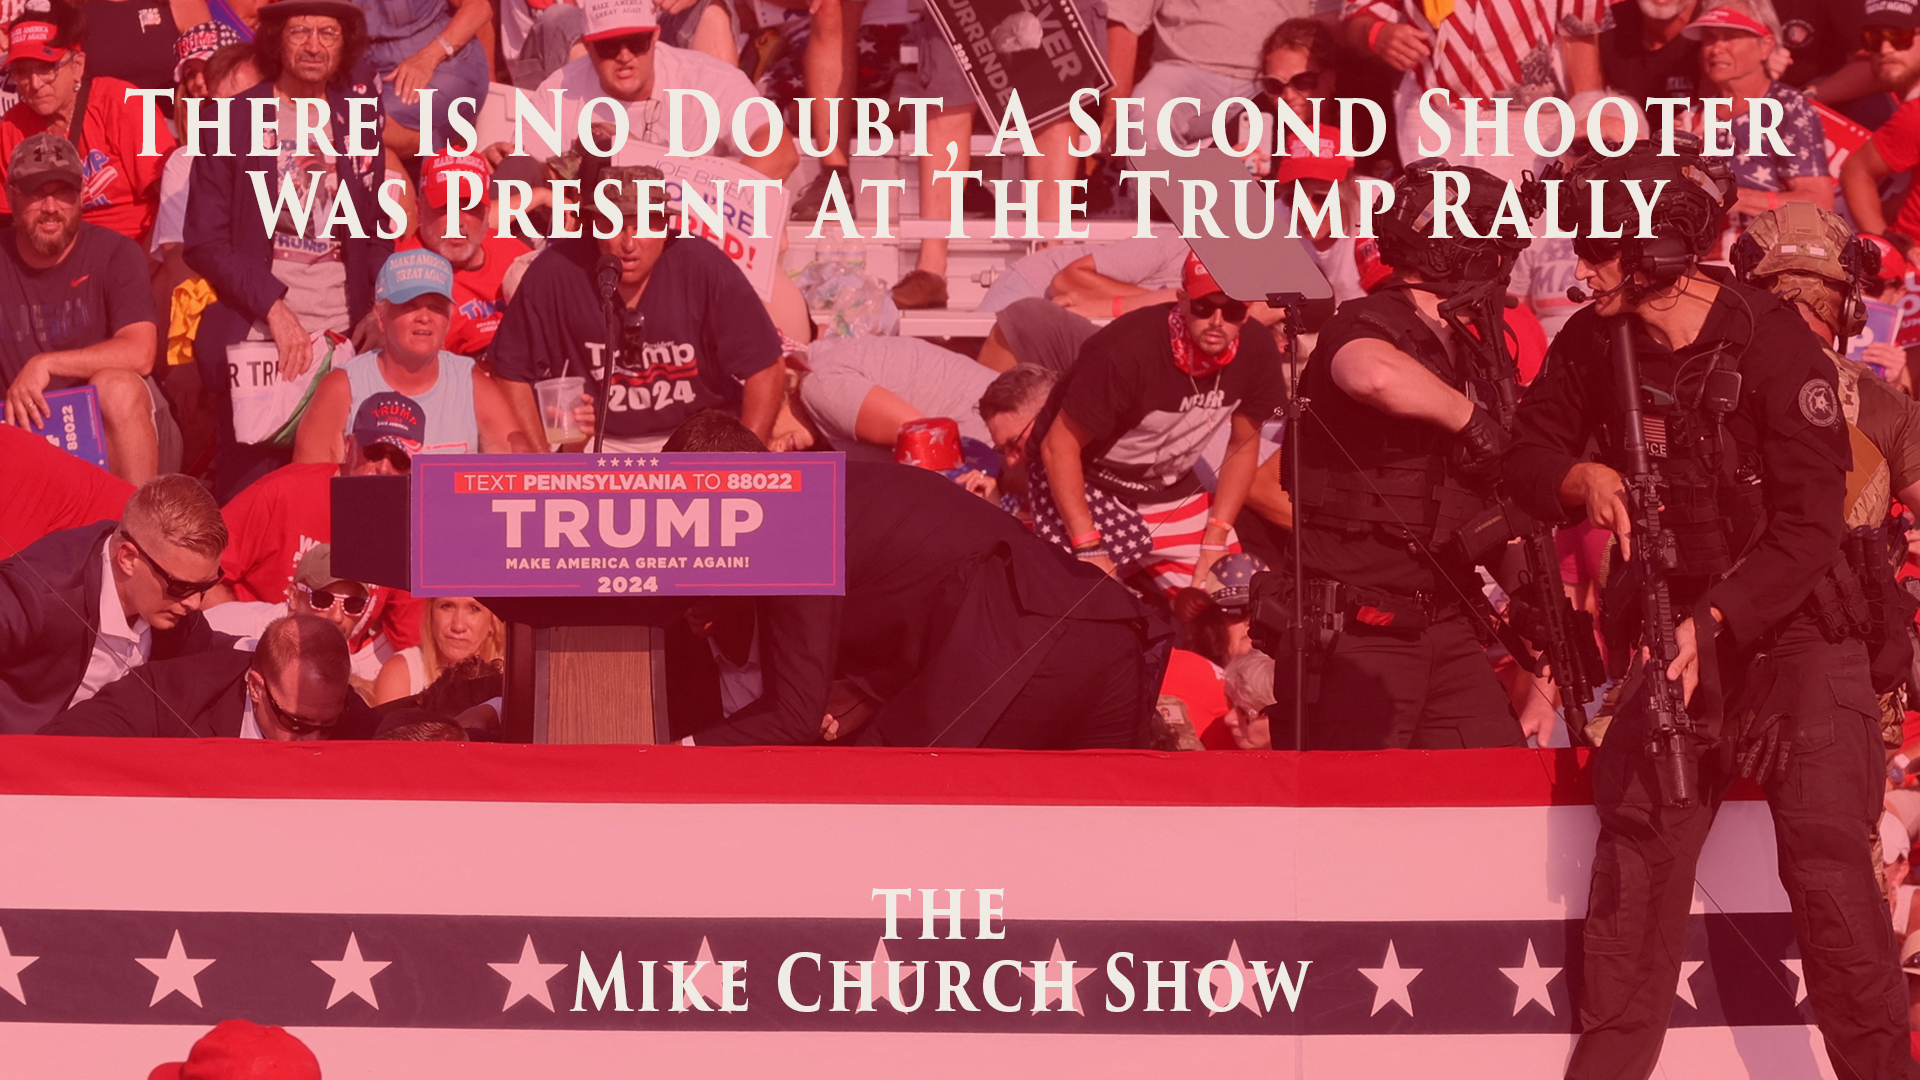 There Is No Doubt, A Second Shooter Was Present At The Trump Rally